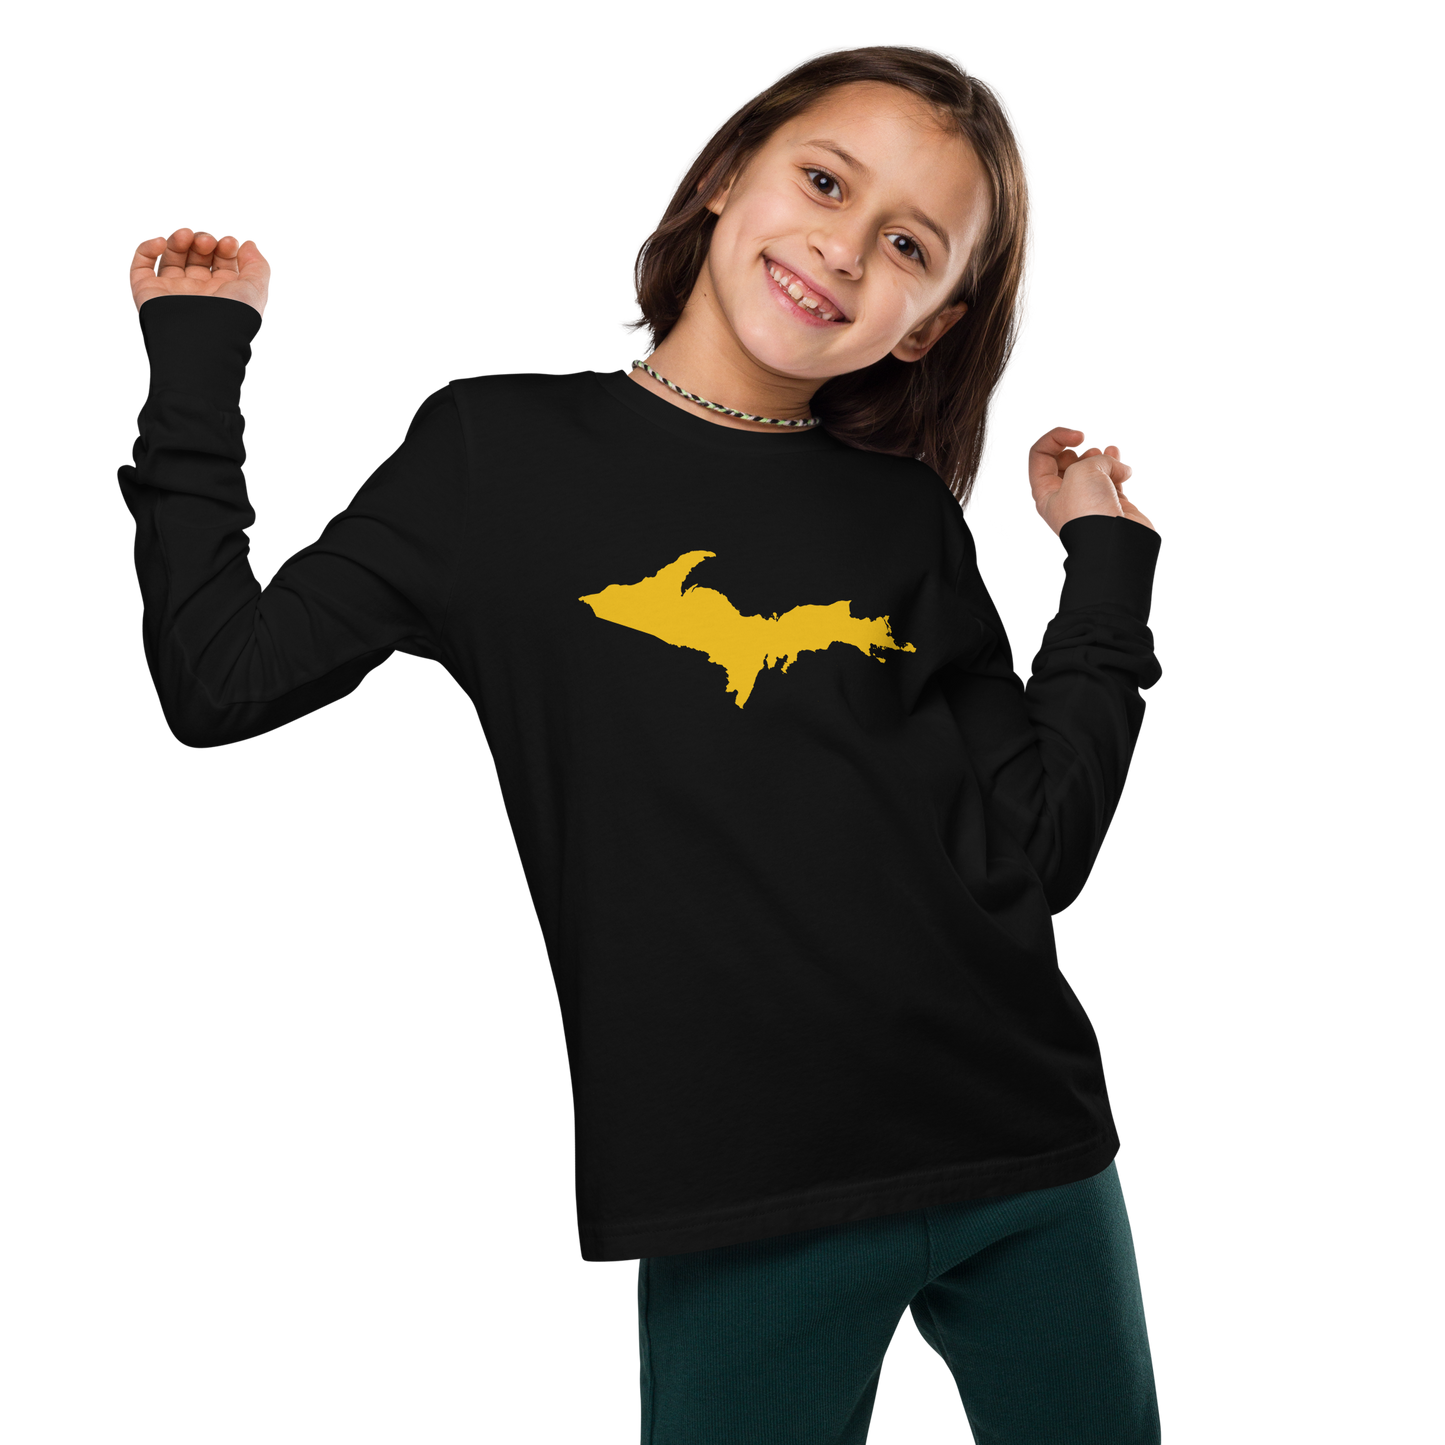 Michigan Upper Peninsula T-Shirt (w/ Gold UP Outline) | Youth Long Sleeve